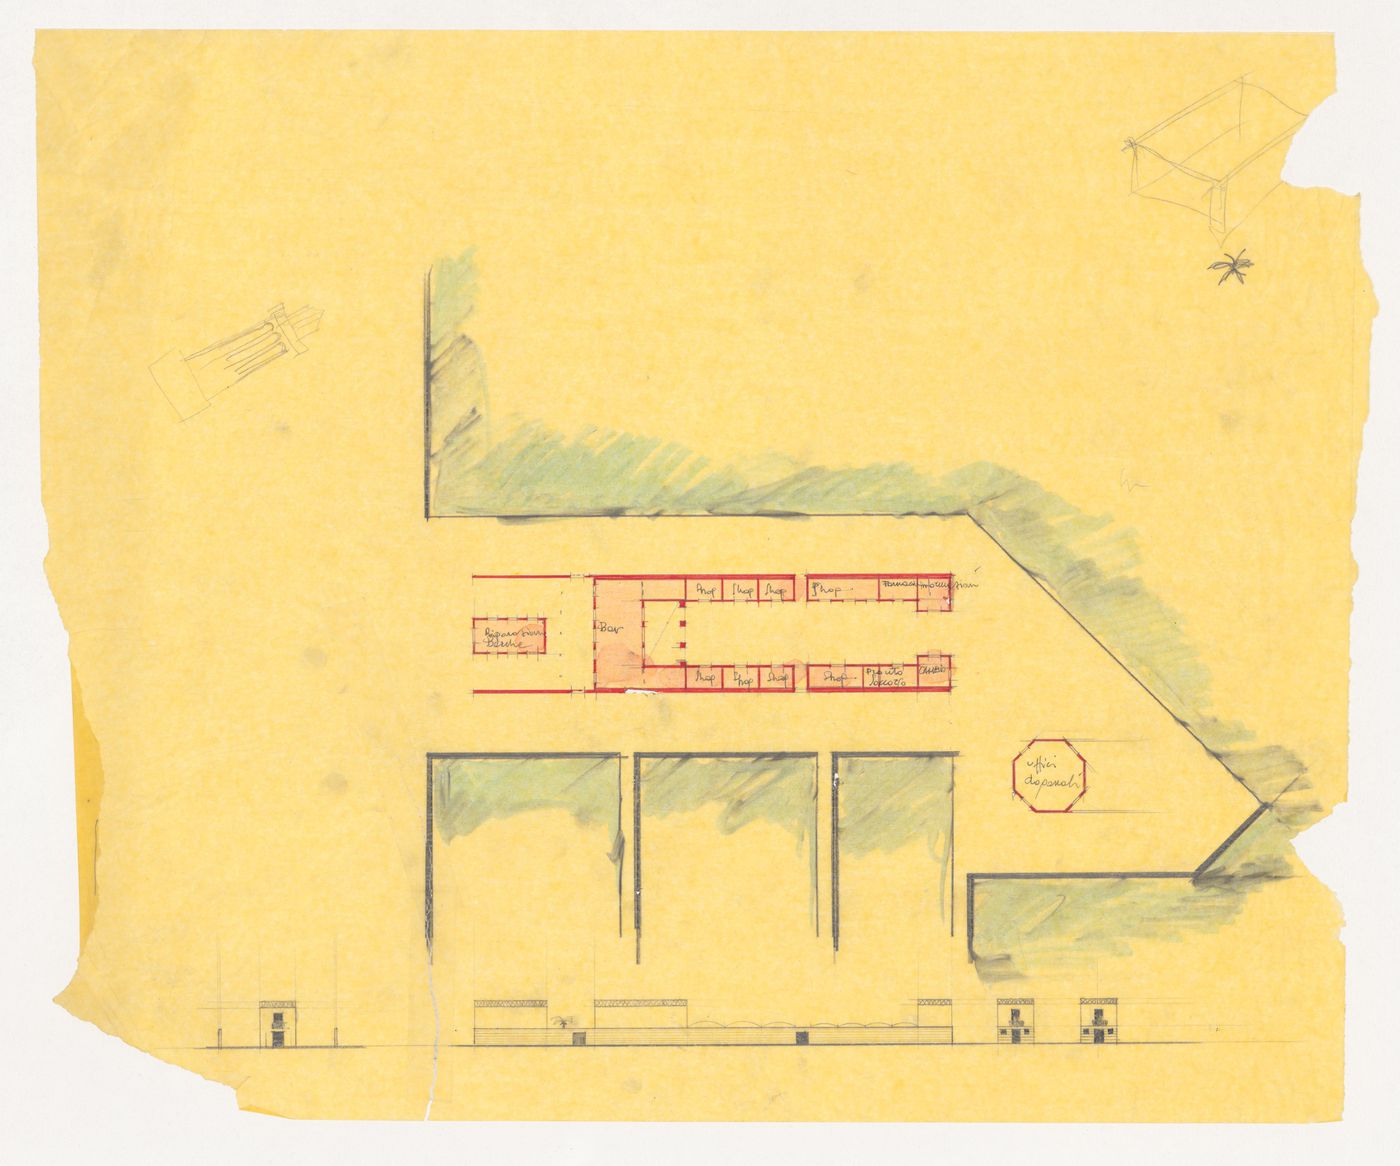 Unidentified plan and elevation with sketches